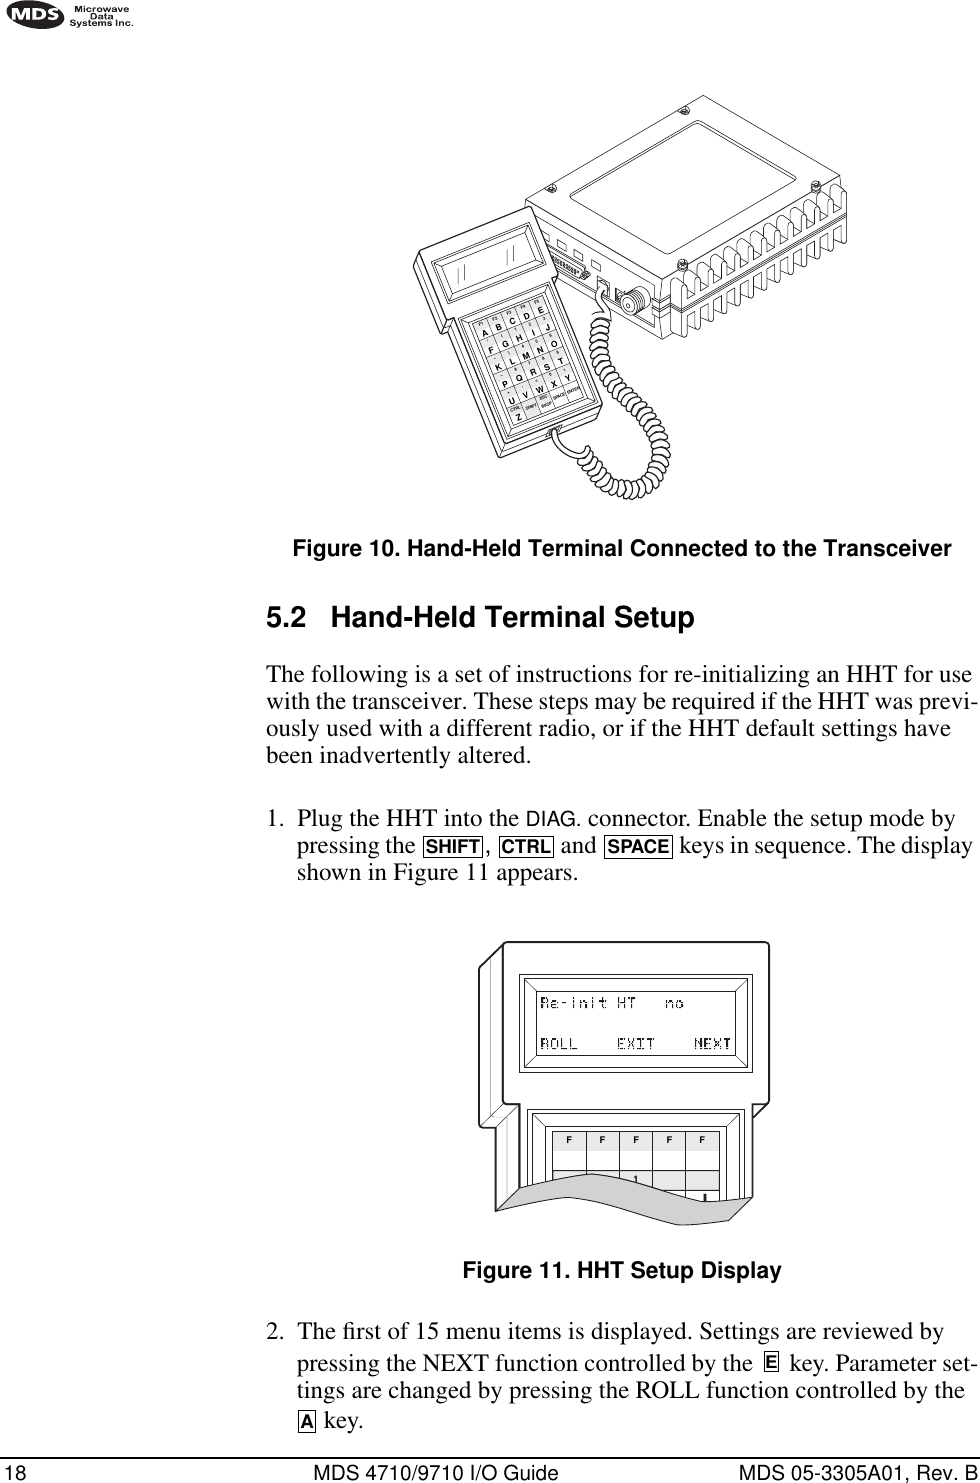 18 MDS 4710/9710 I/O Guide MDS 05-3305A01, Rev. BInvisible place holderFigure 10. Hand-Held Terminal Connected to the Transceiver5.2 Hand-Held Terminal SetupThe following is a set of instructions for re-initializing an HHT for use with the transceiver. These steps may be required if the HHT was previ-ously used with a different radio, or if the HHT default settings have been inadvertently altered.1. Plug the HHT into the DIAG. connector. Enable the setup mode by pressing the  ,   and   keys in sequence. The display shown in Figure 11 appears.Invisible place holderFigure 11. HHT Setup Display2. The ﬁrst of 15 menu items is displayed. Settings are reviewed by pressing the NEXT function controlled by the   key. Parameter set-tings are changed by pressing the ROLL function controlled by the  key.ANTENNA13.8 VDC+ –ZCTRLU+–K*F/AF1V,Q#)G(BF2SHIFT ESCW=R7M4H1CF3BKSPX0S8N5I2DF4SPACEYT9O63EF5ENTERJLPSHIFTCTRLSPACEFF1FFFEA